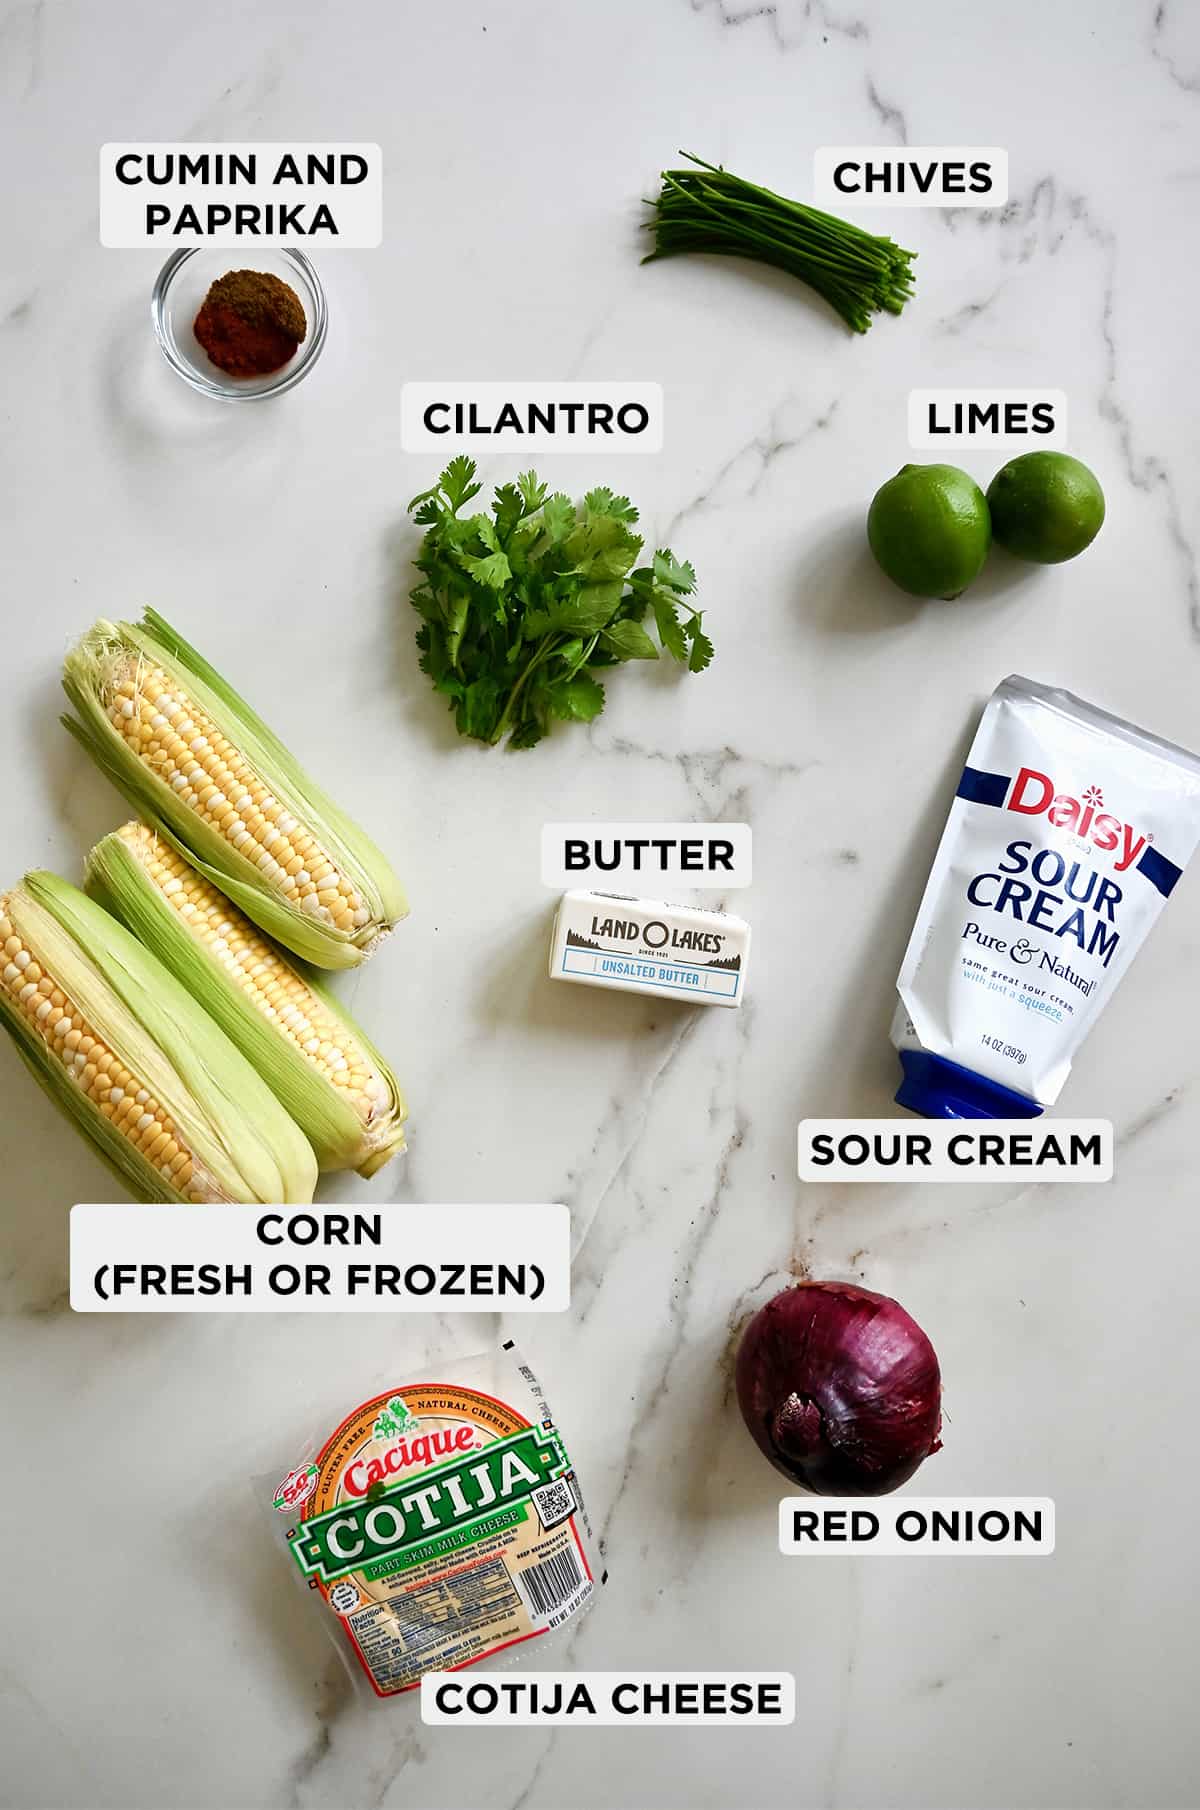 A labeled image of all the ingredients needed for Mexican street corn, including corn on the cob, cilantro, butter, cumin, paprika, red onion, limes, sour cream and cojita cheese.